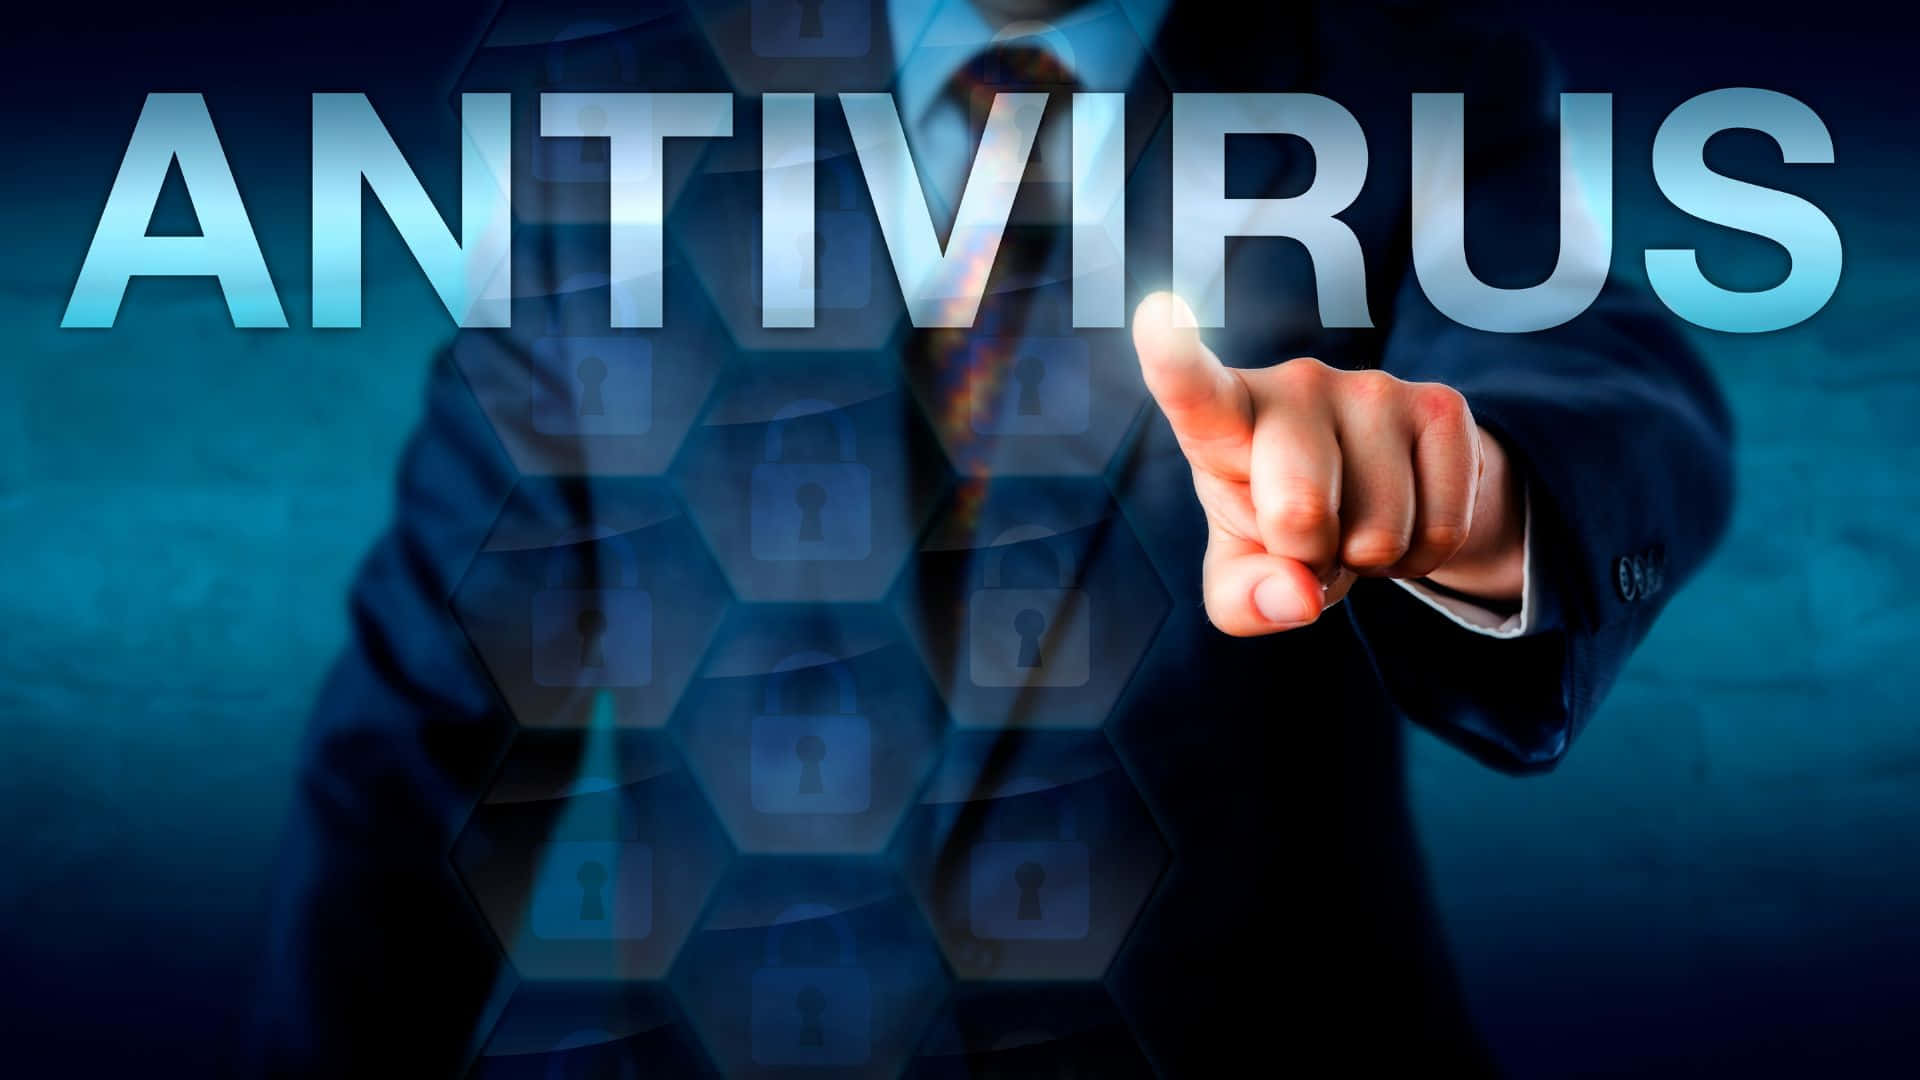 Man In A Business Suit Pointing At Antivirus Wallpaper